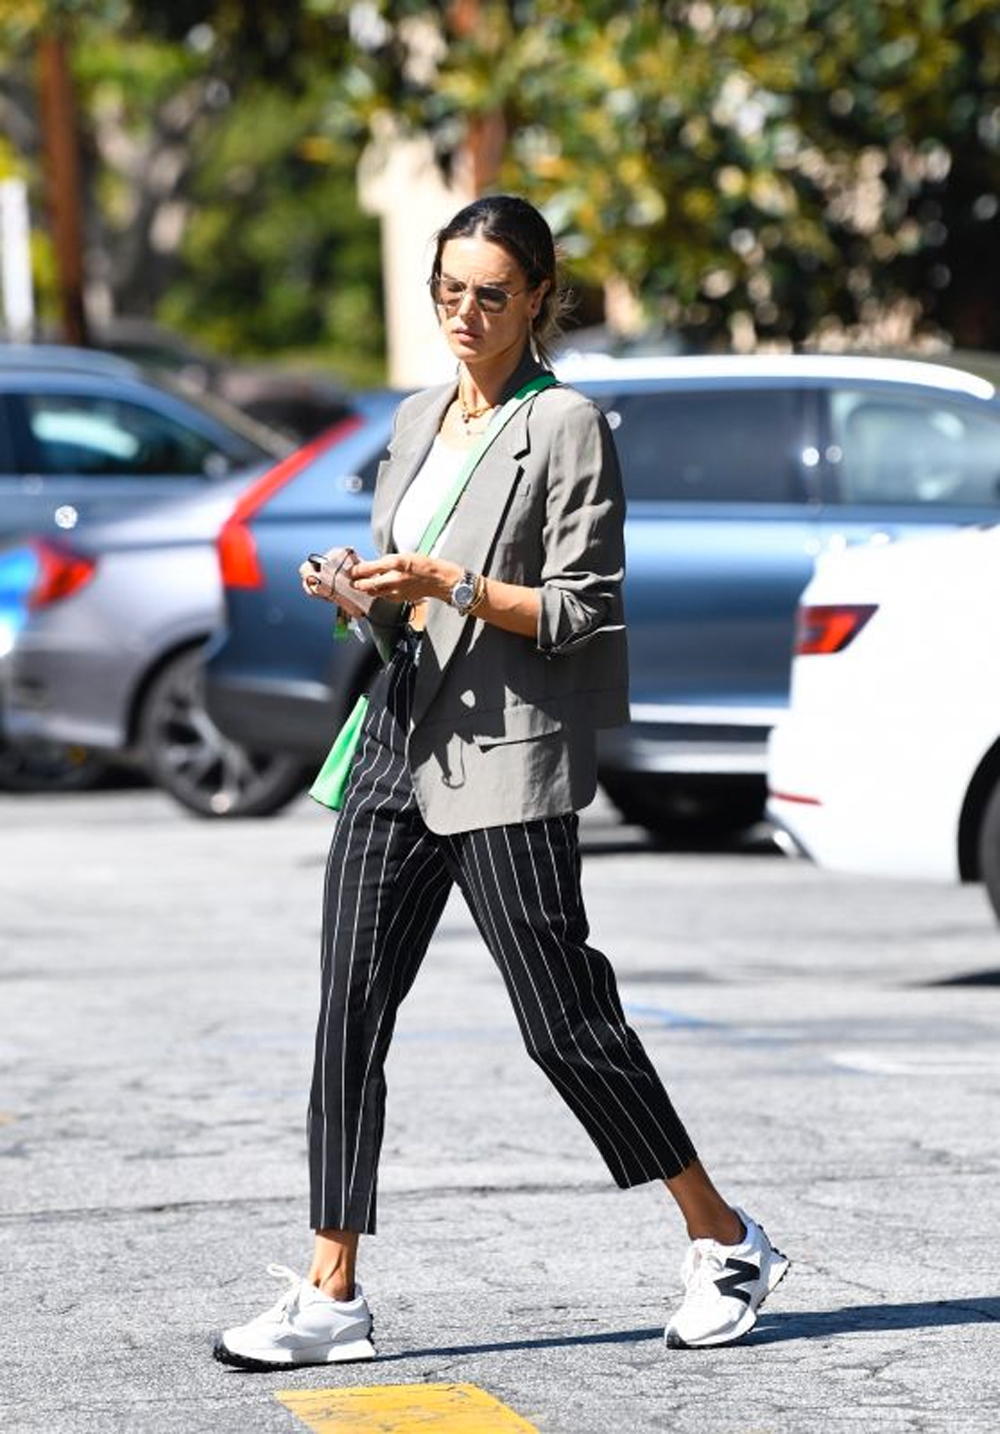 Alessandra Ambrosio out & about | About Her